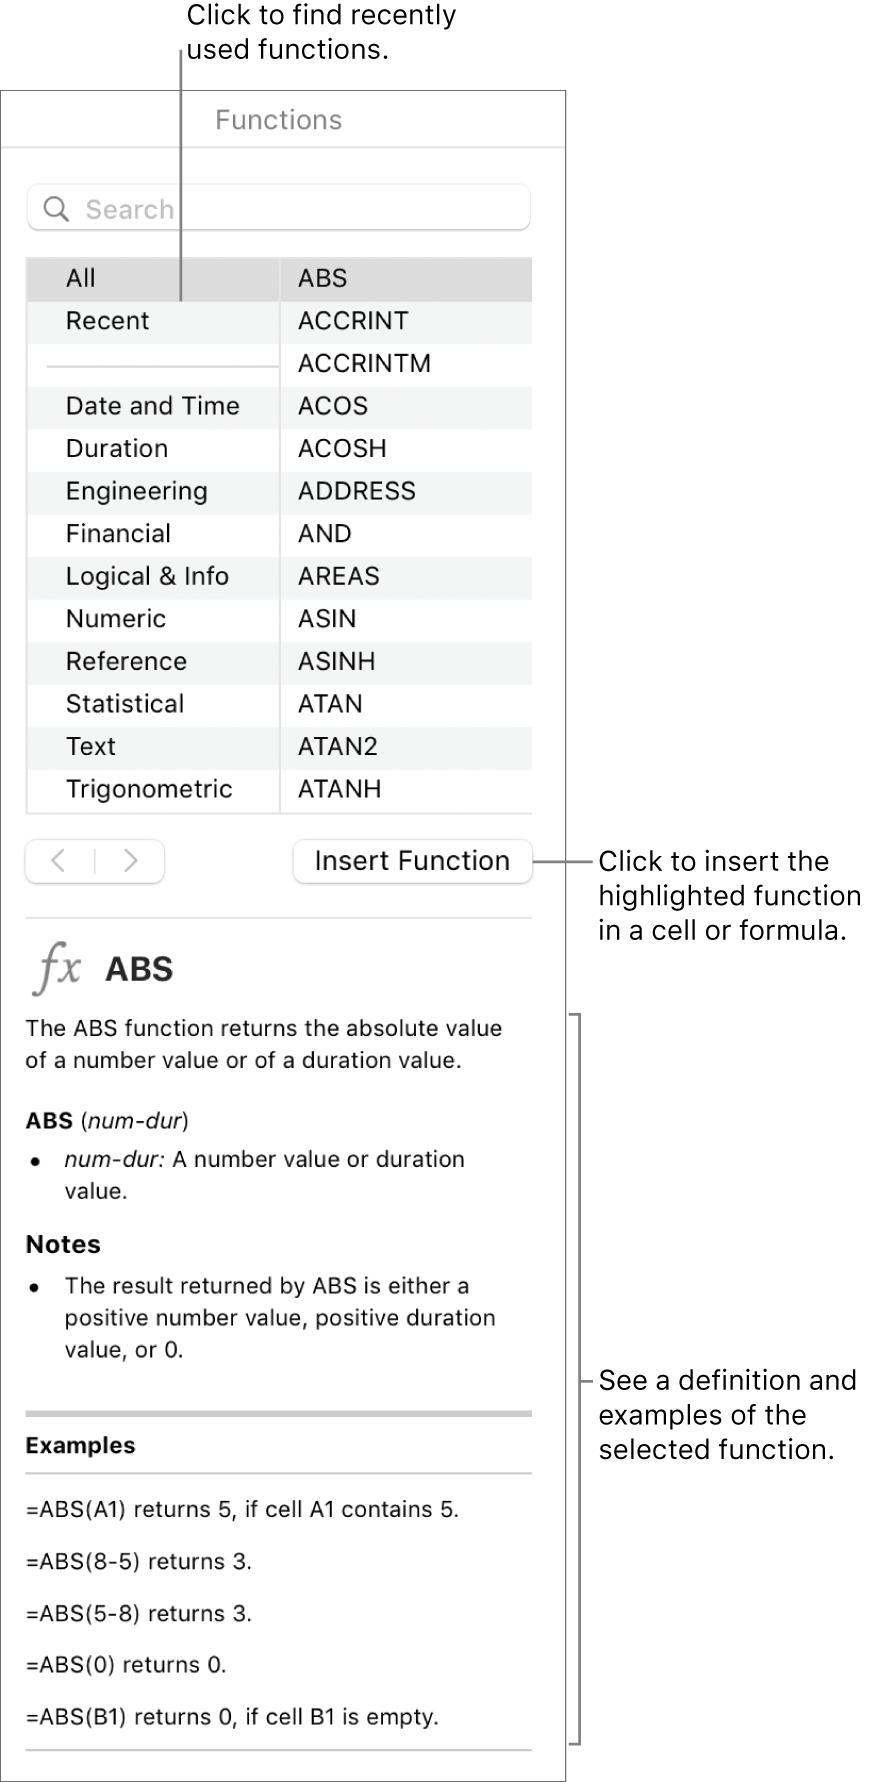 The Functions Browser with call outs to recently used functions, the Insert Function button and the function definition.